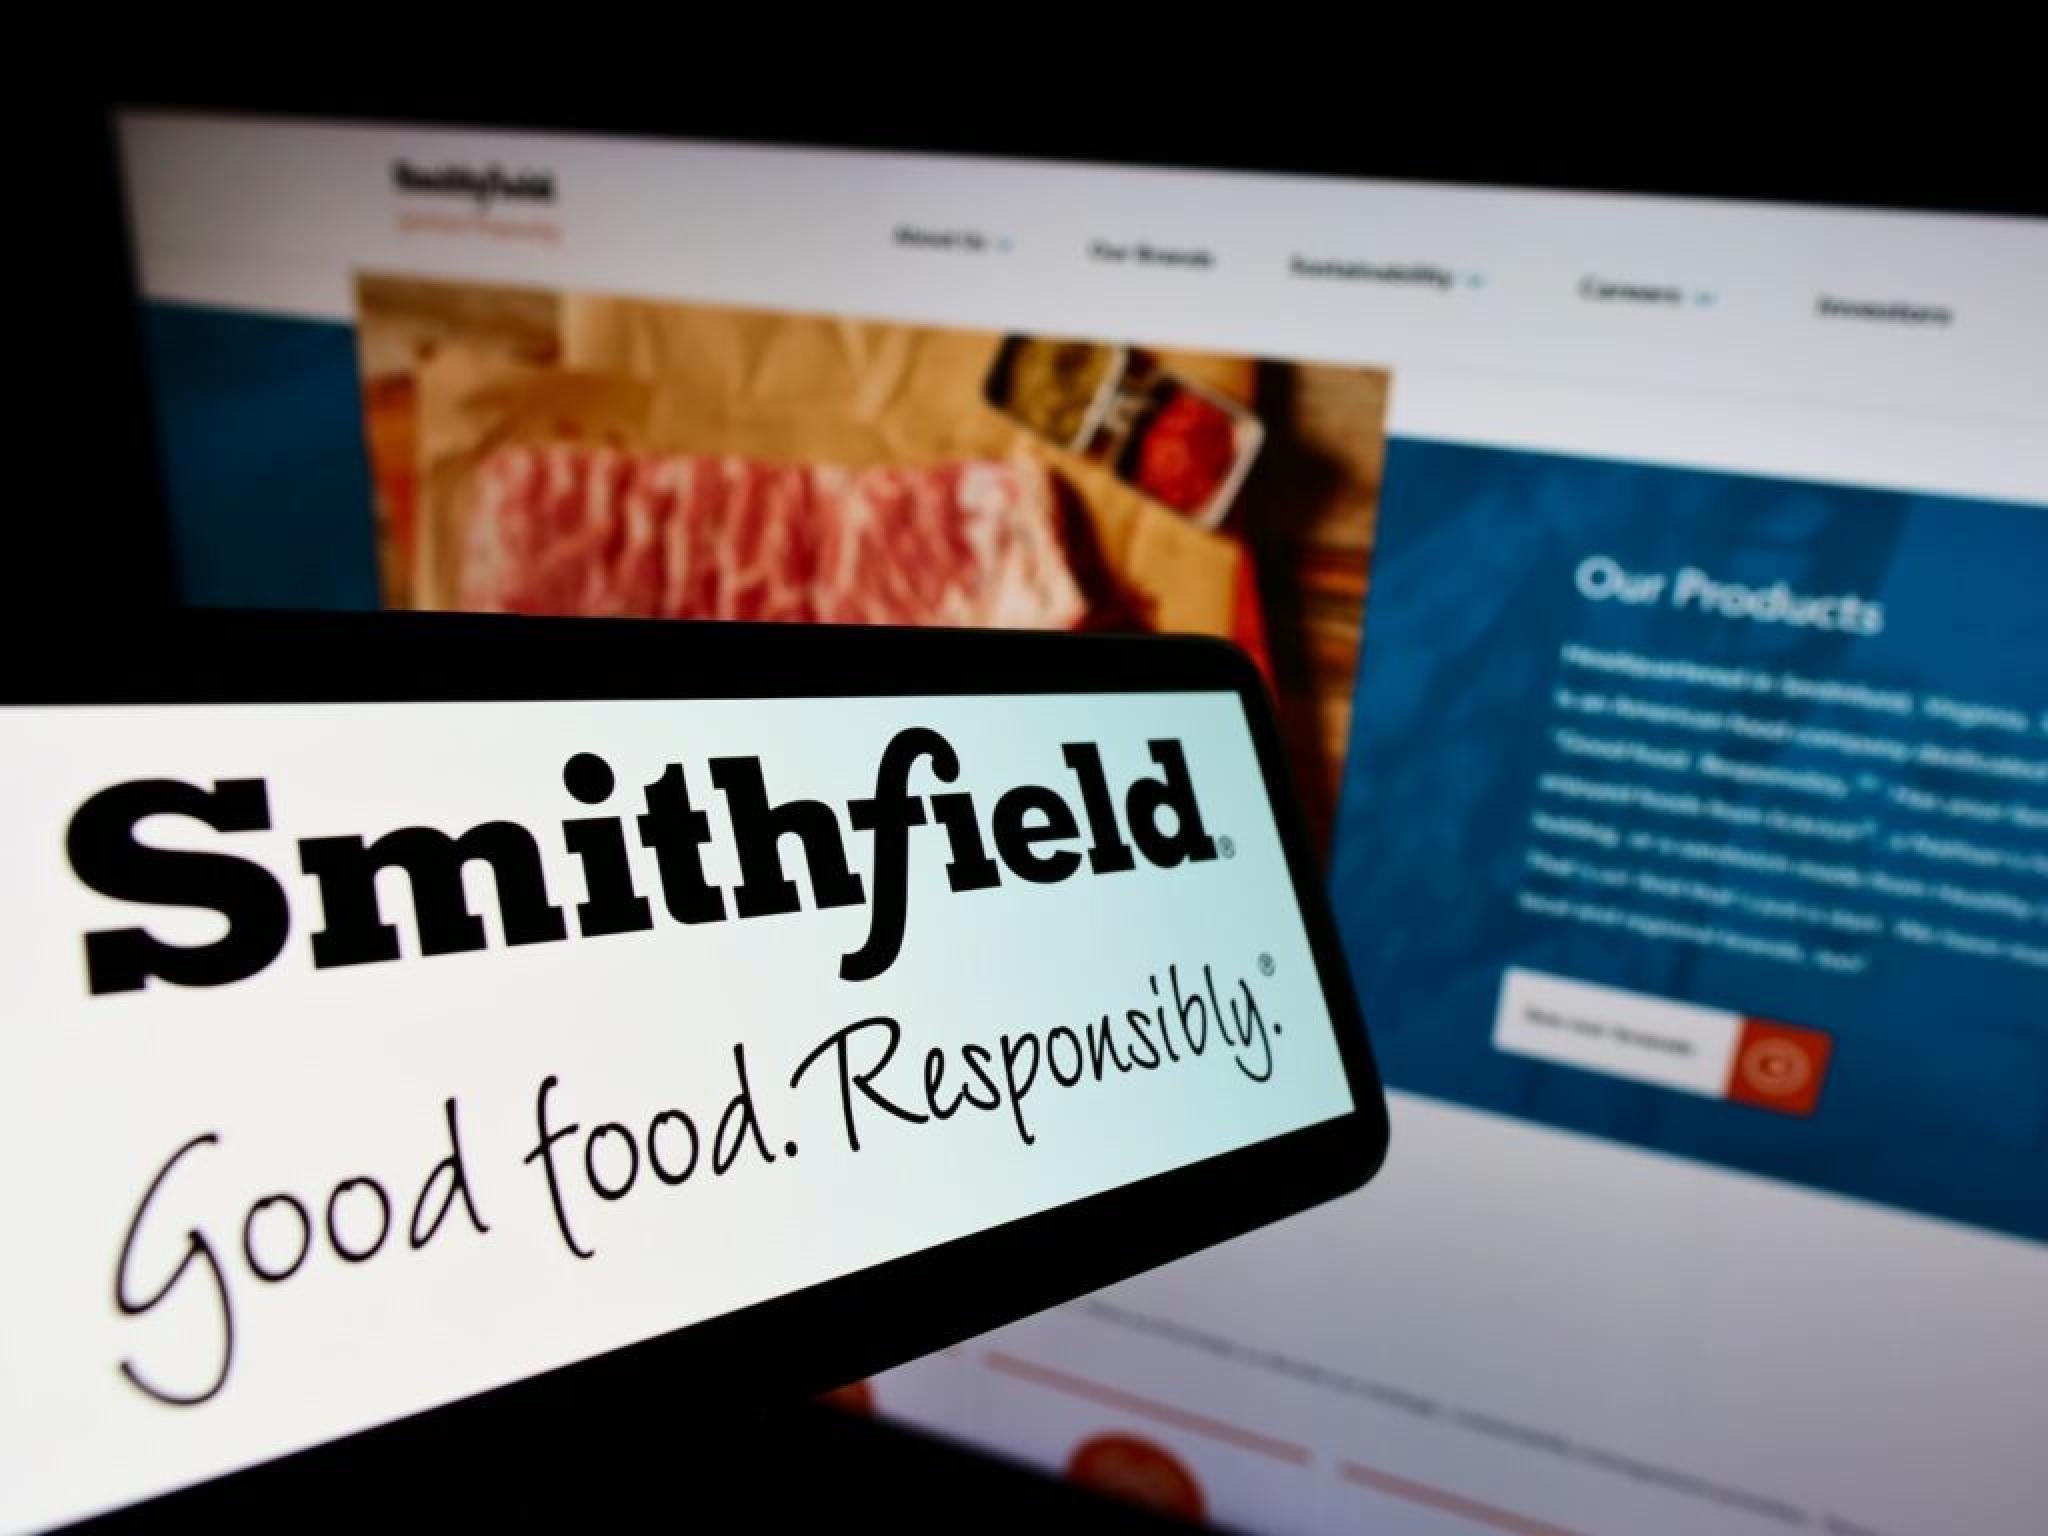  hong-kongs-wh-group-subsidiary-smithfield-foods-gears-up-for-1b-ipo-in-us-report-updated 